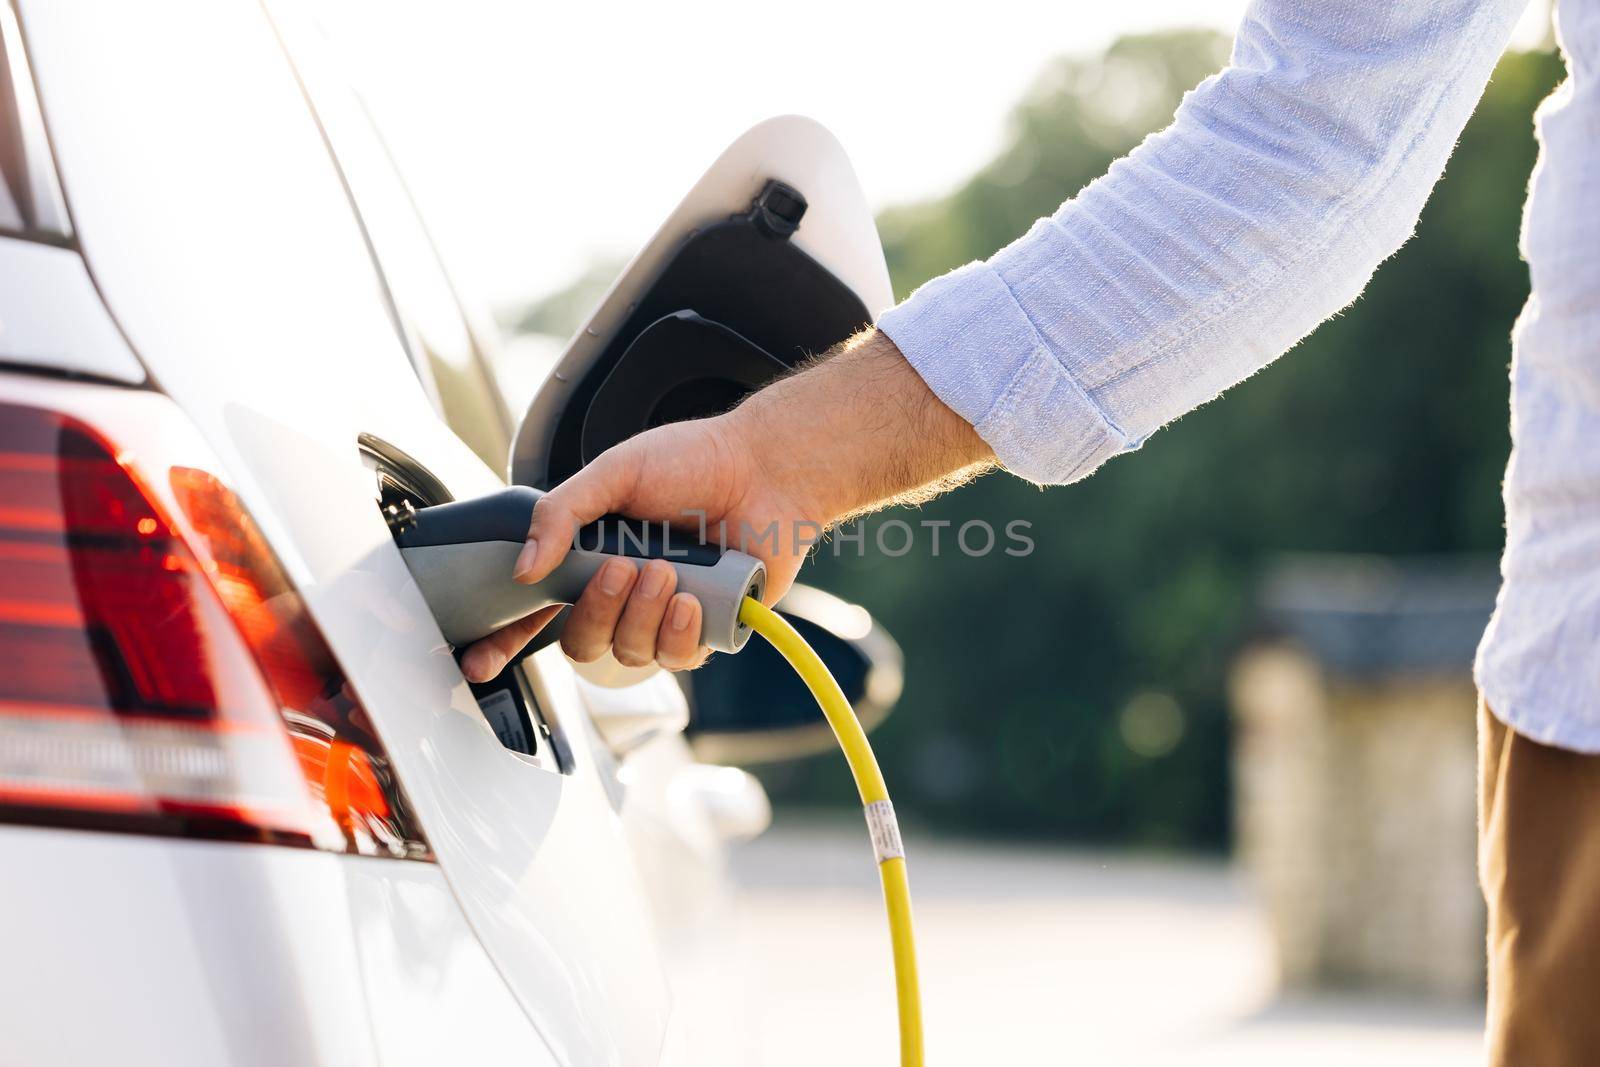 The driver of the electric car inserts the electrical connector to charge the batteries. Unrecognizable man attaching power cable to electric car. Electric vehicle Recharging battery charging port by uflypro